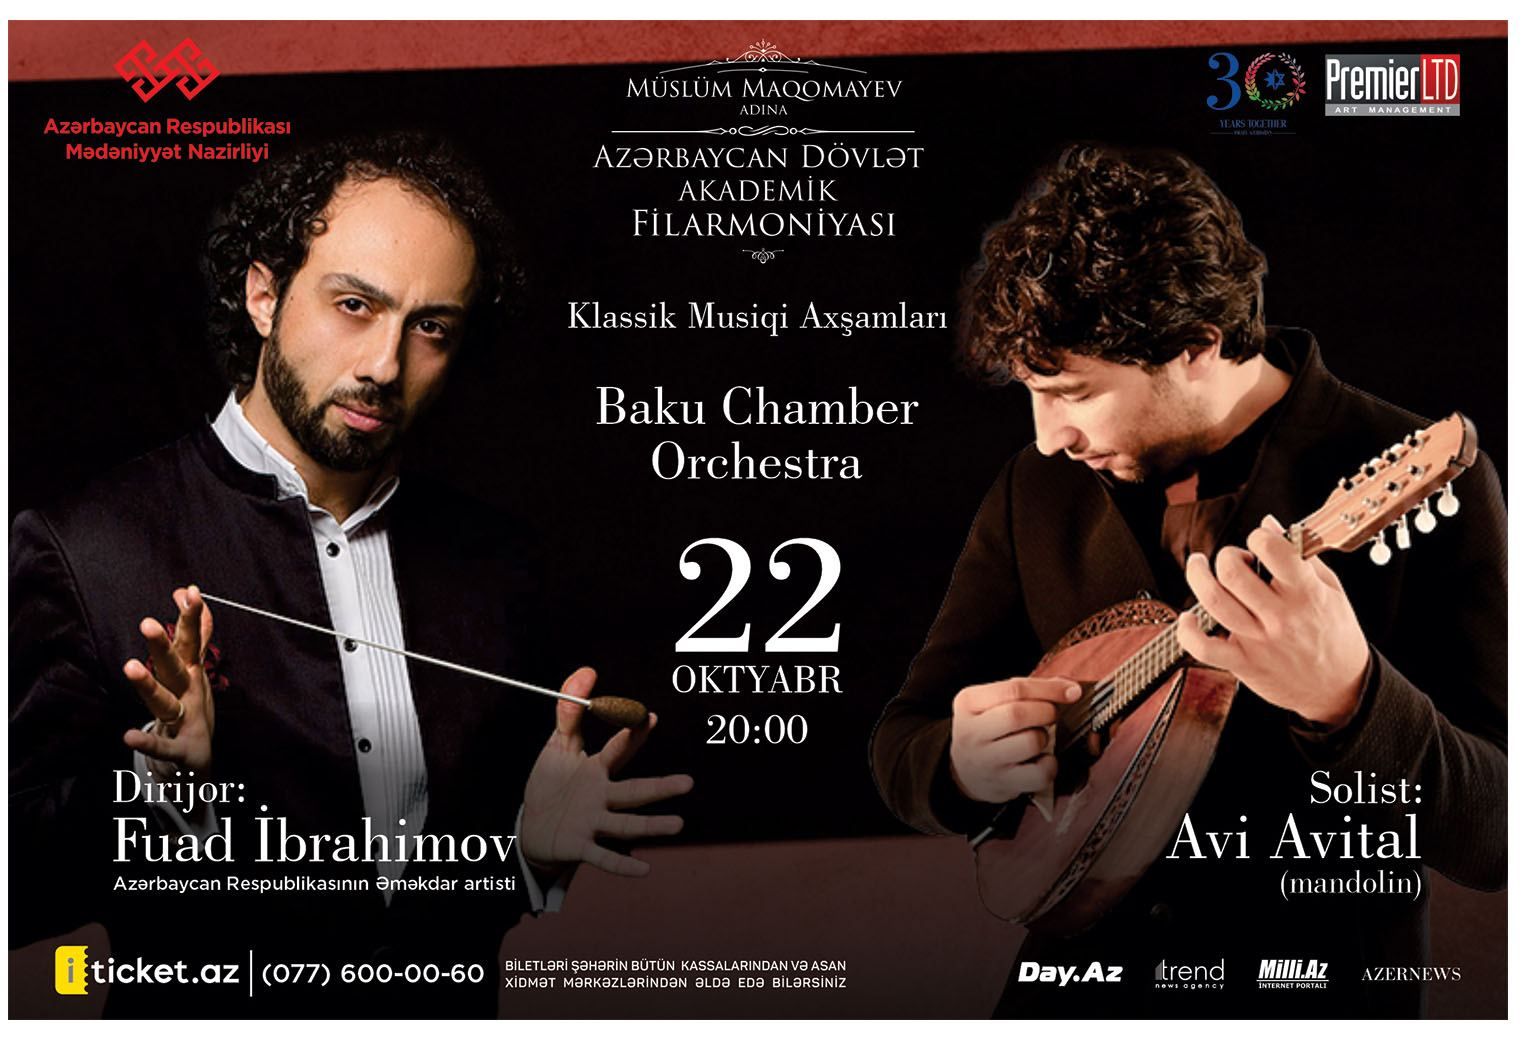 Grammy nominee to give concert in Baku